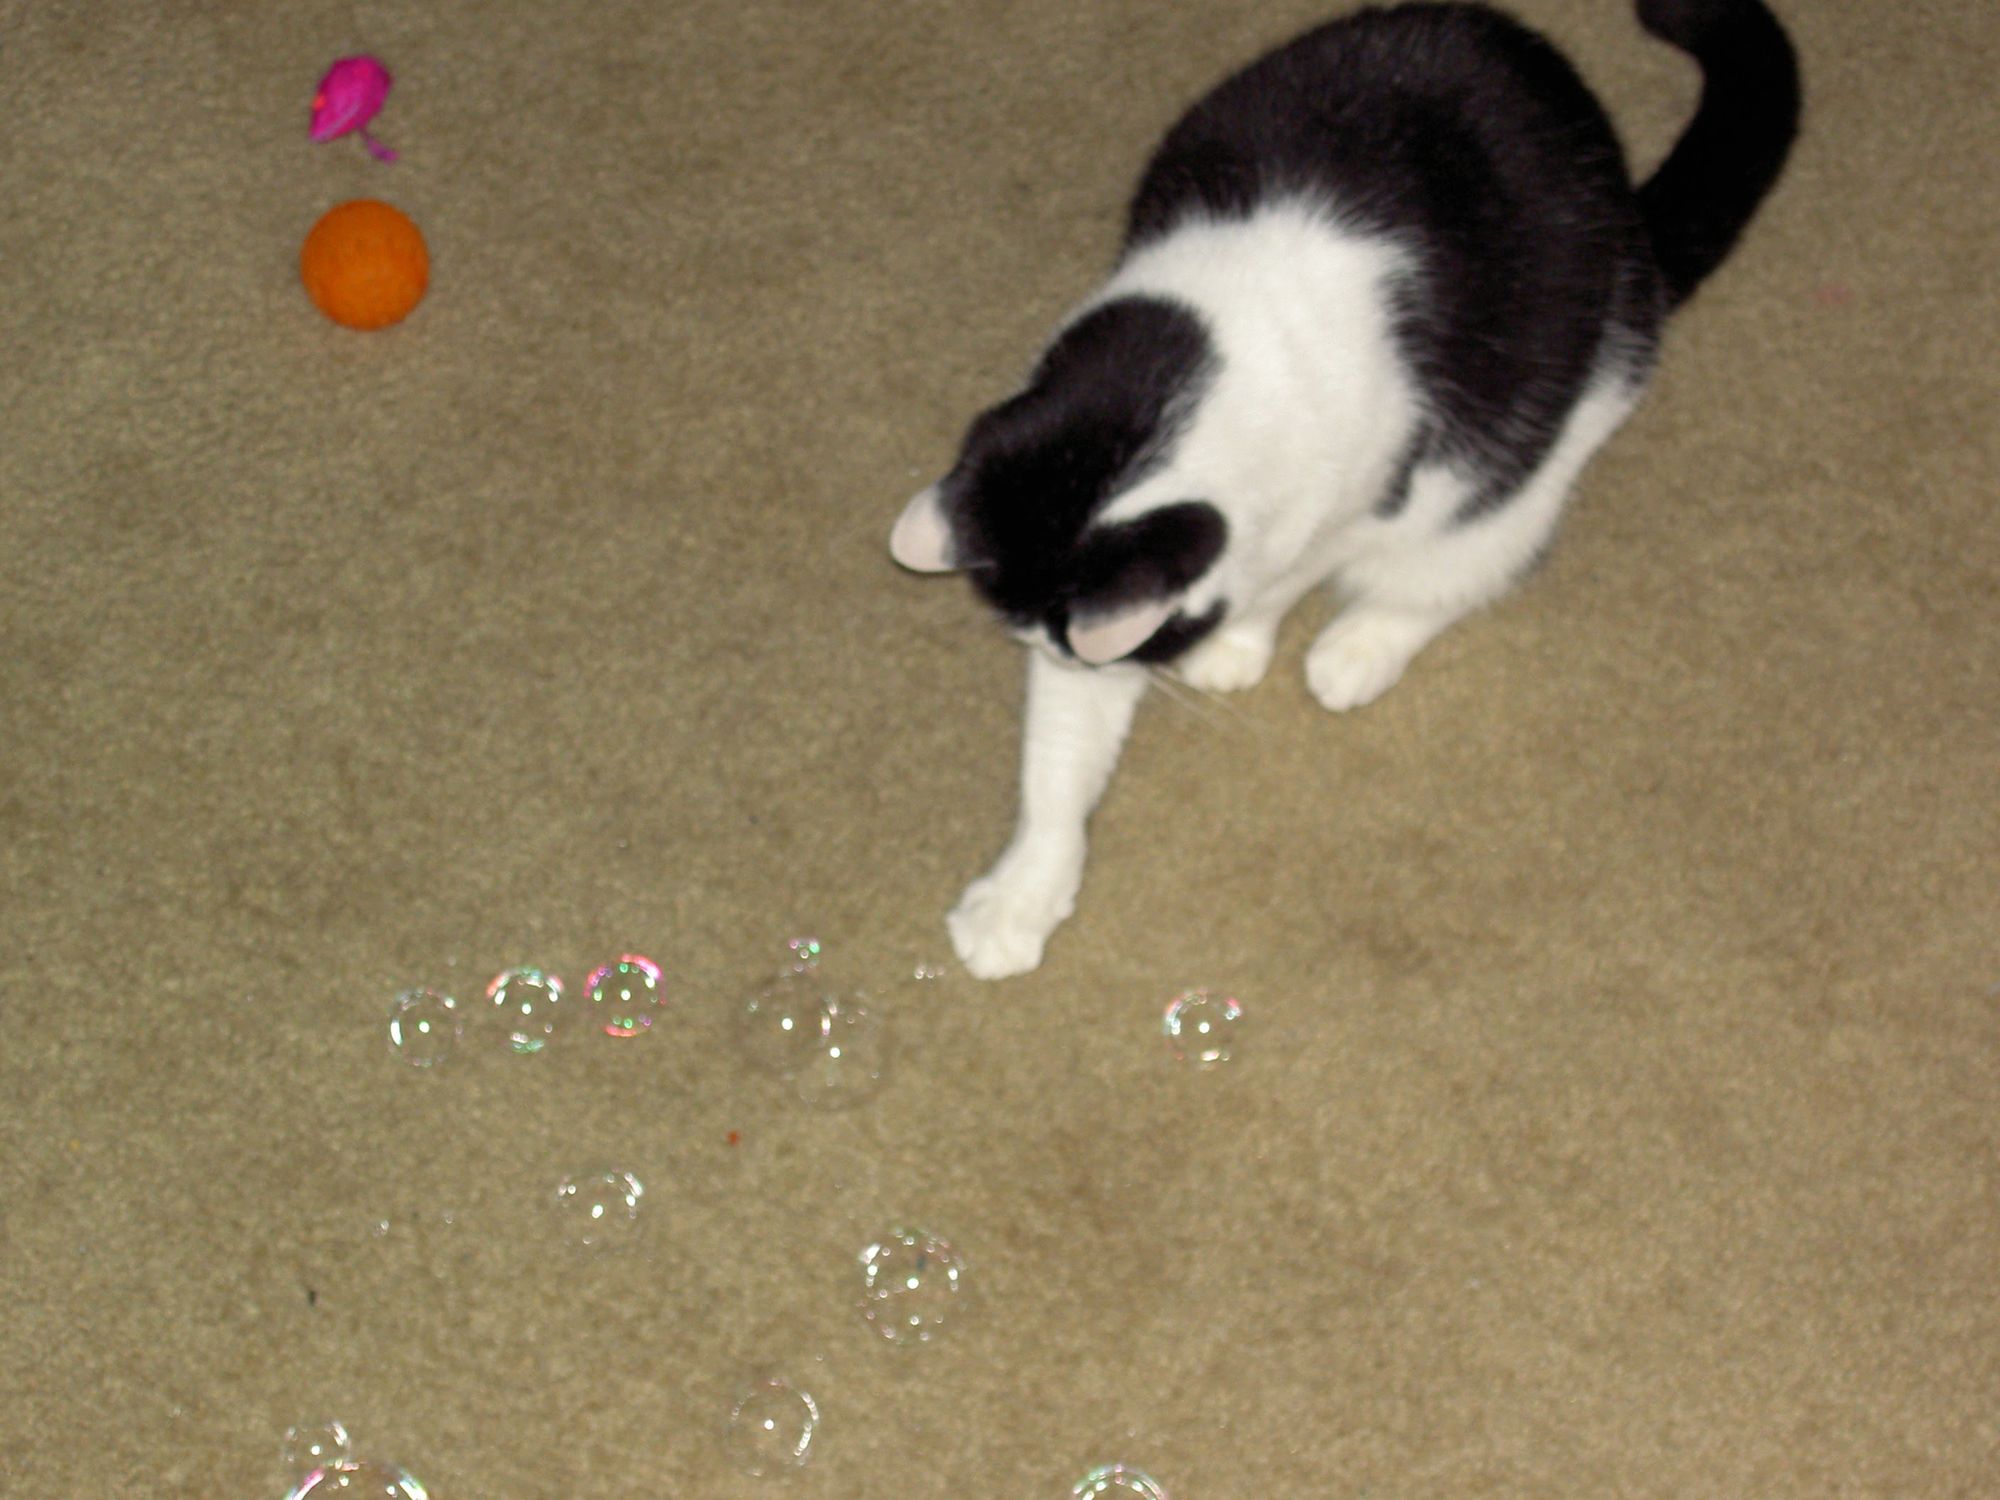 My black and white cat playing with soap bubbles